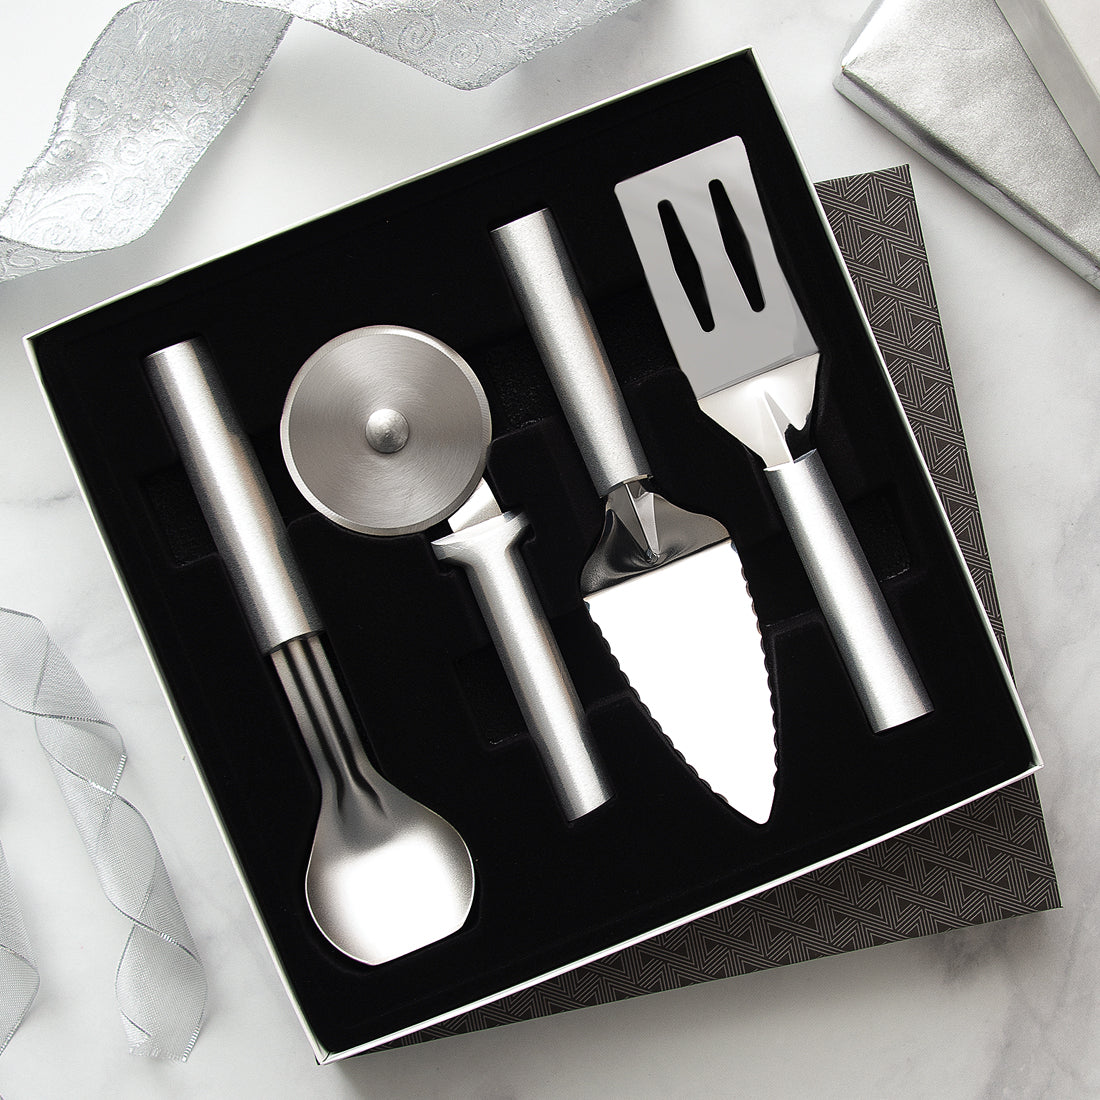 Shapes Captain Stainless Steel Set of Spoon, Fork and Knife with Gift Box  24 Pcs. Stylish